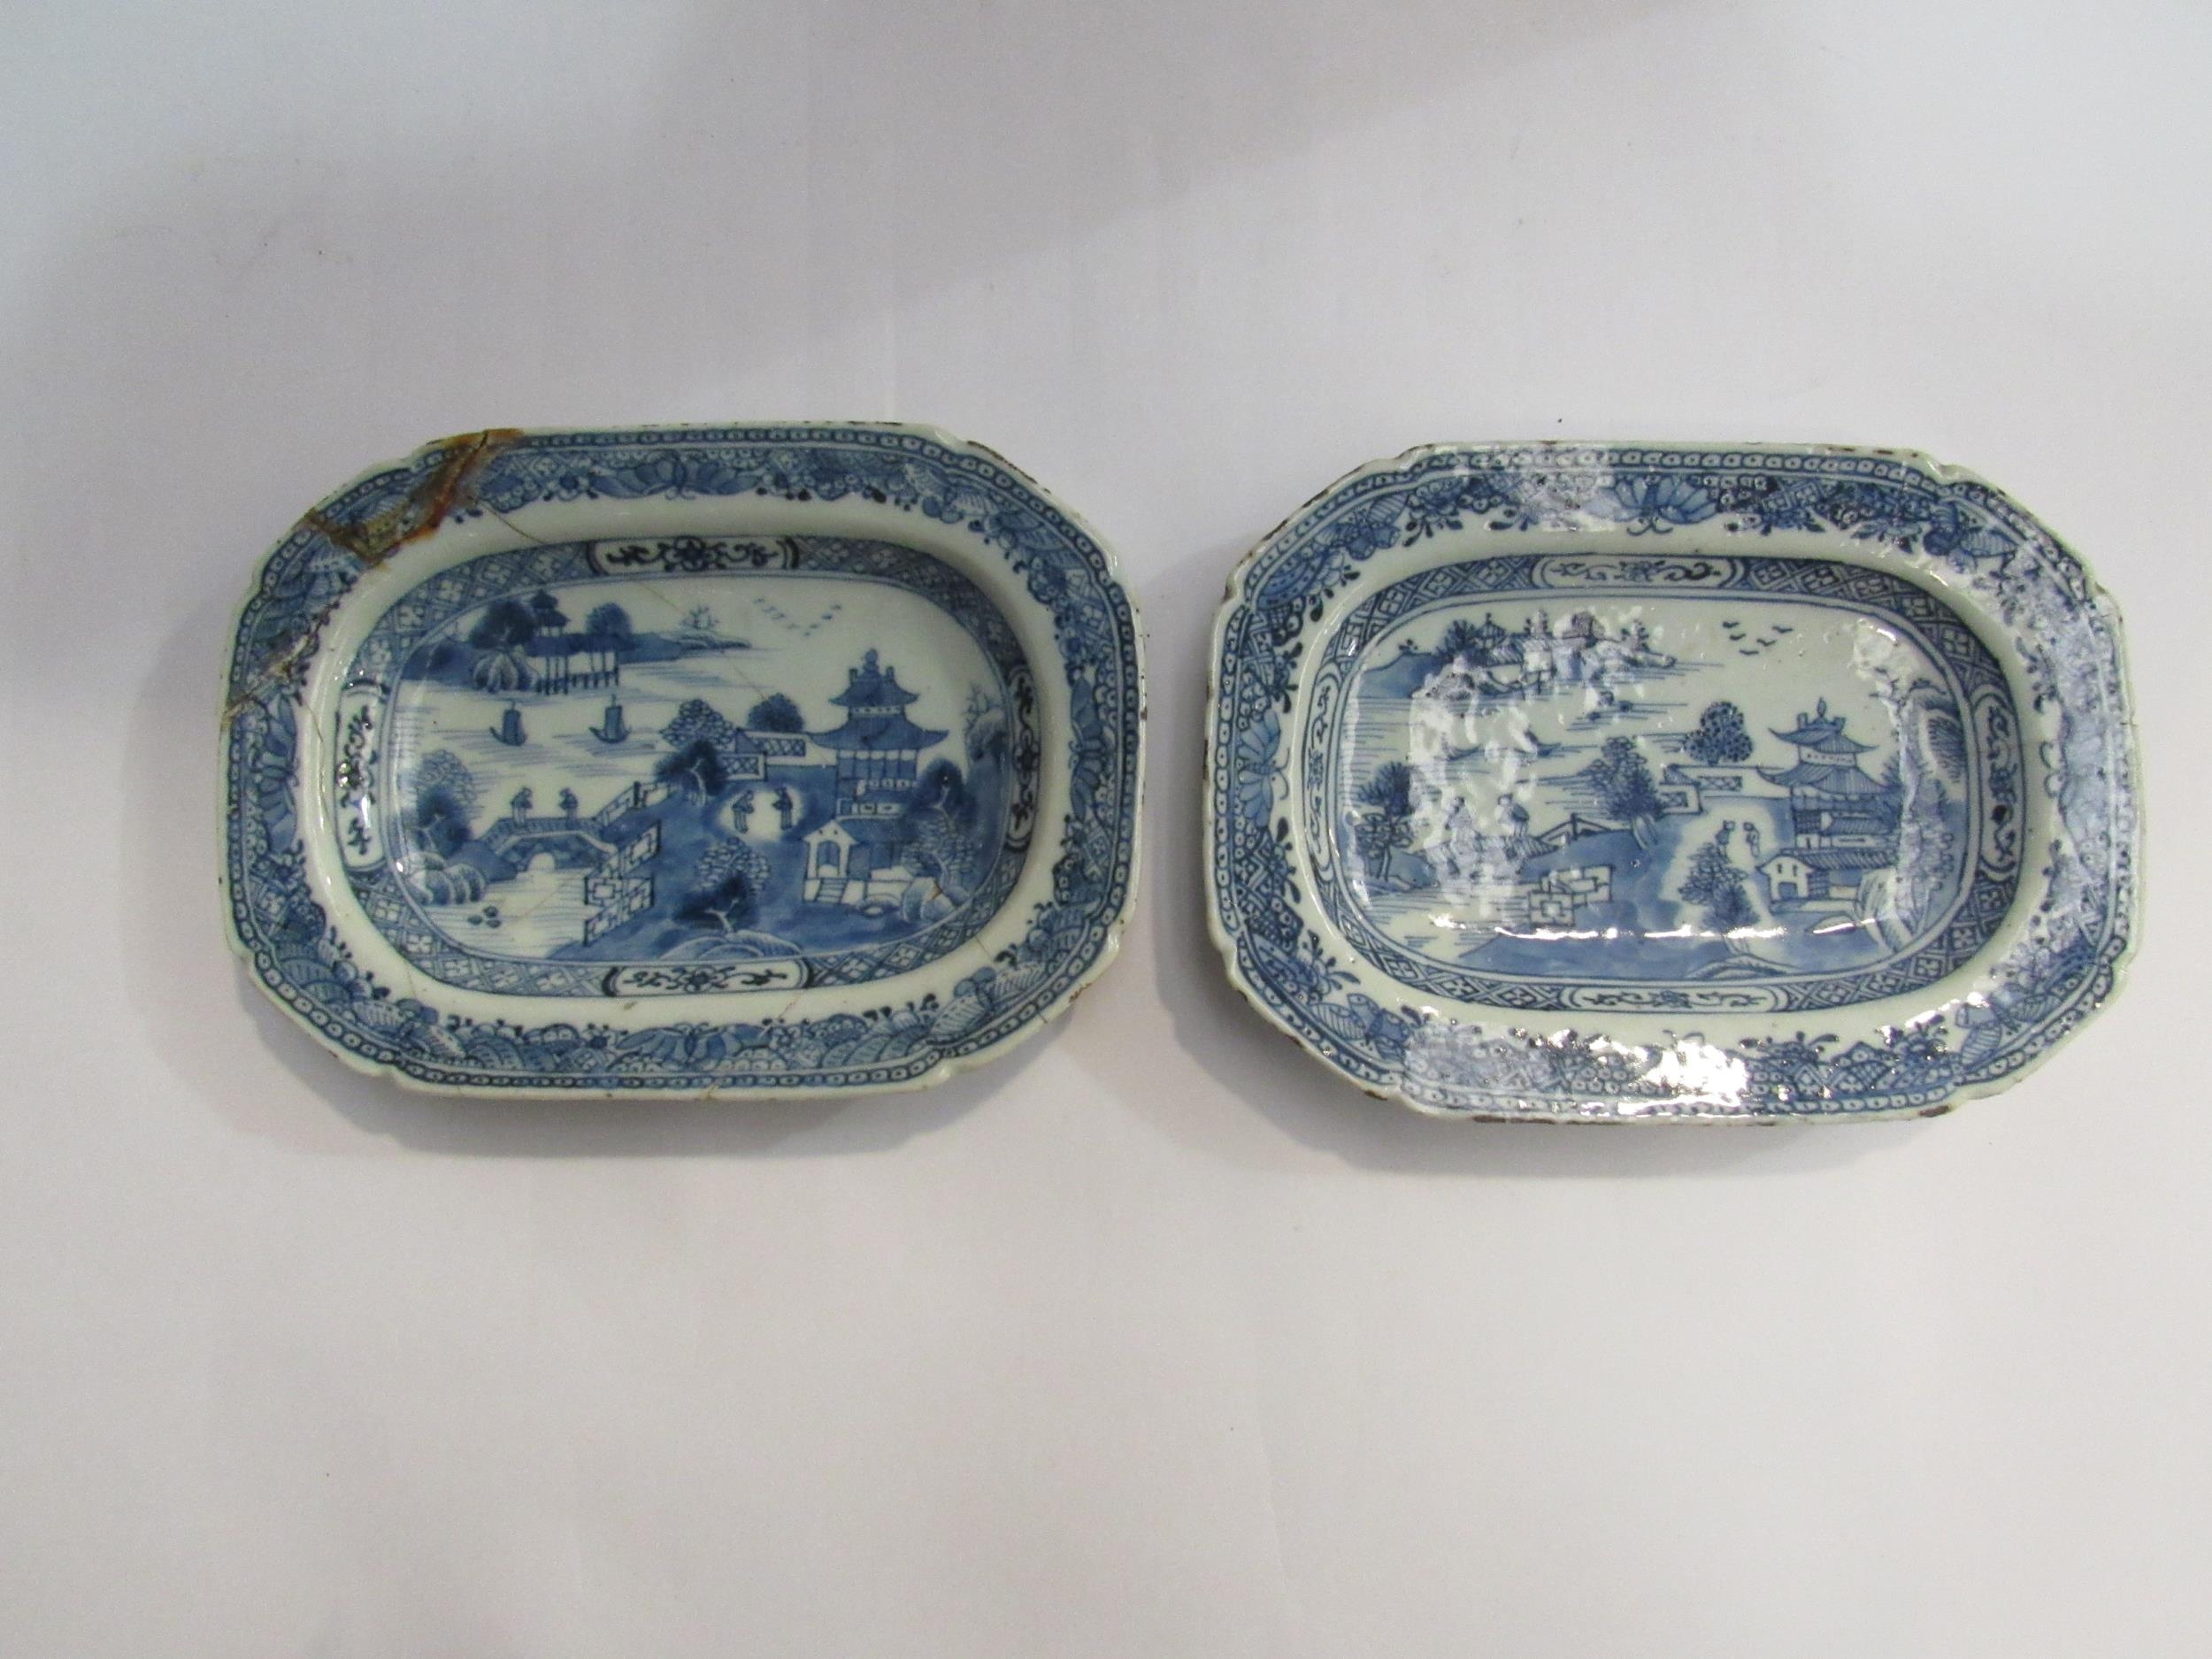 Two Chinese export ware blue and white rectangular plates (2) one a/f, 14cm x 19cm